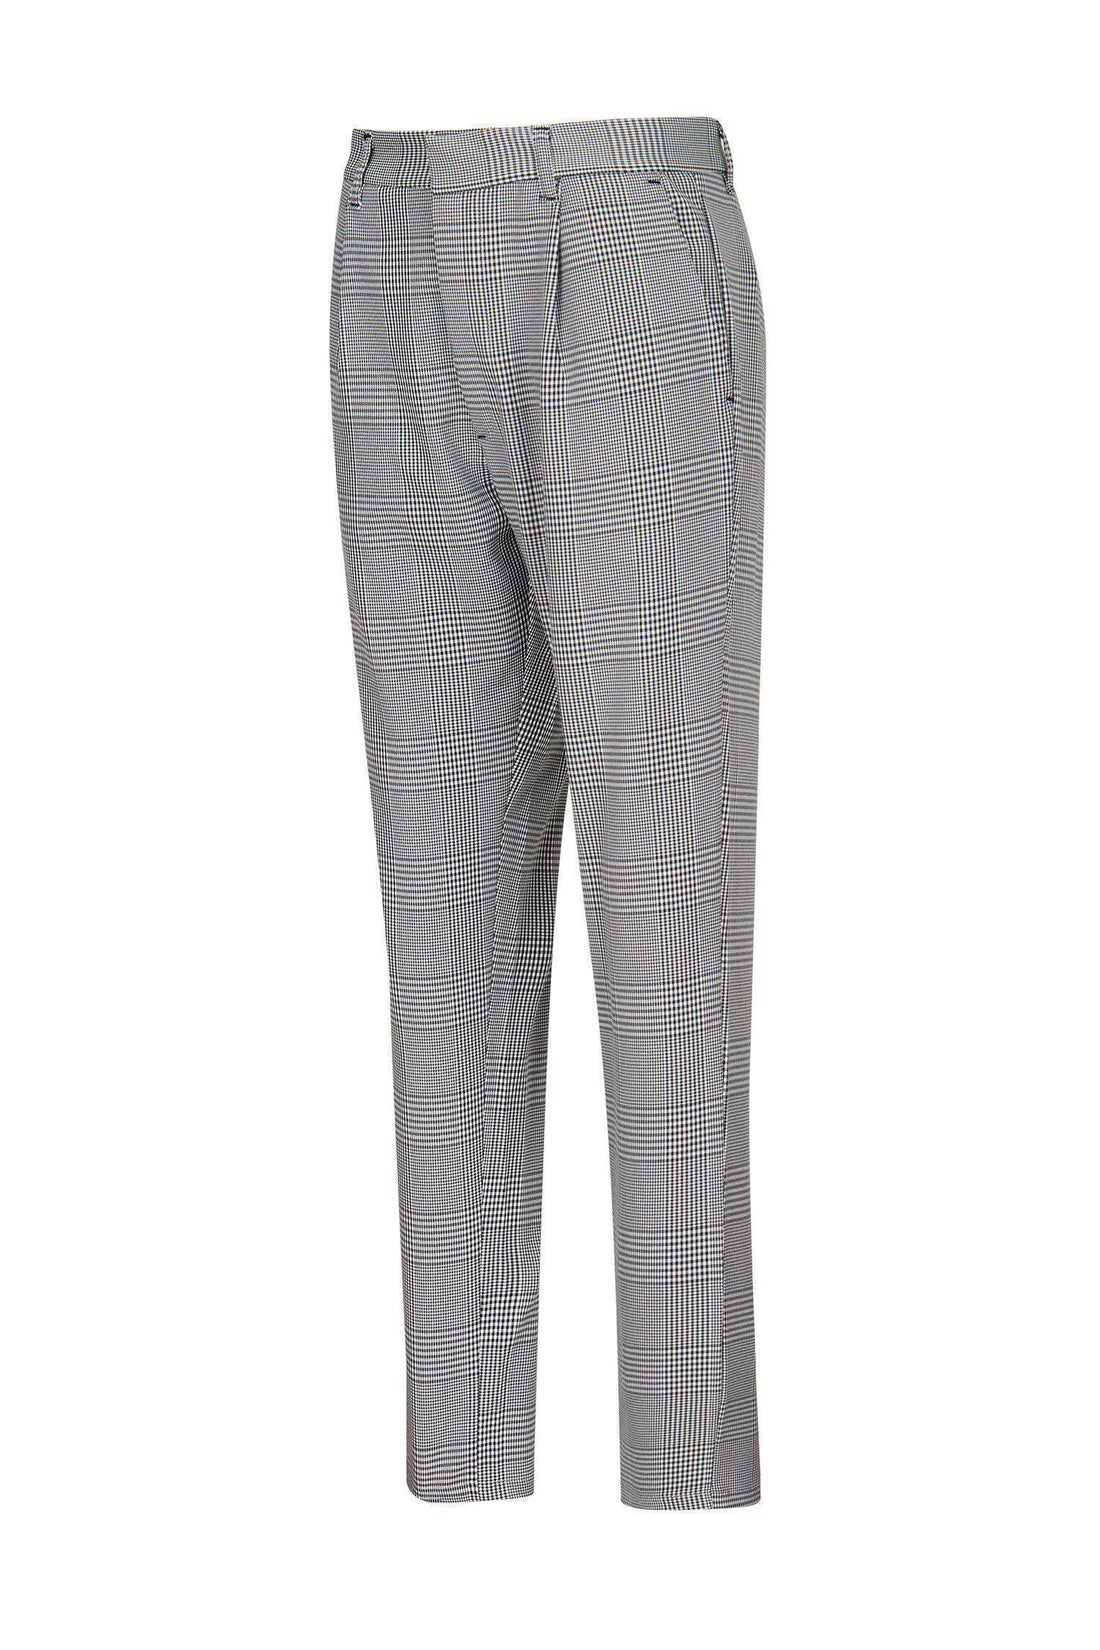 Patterned Slim Fit Casual Trouser - Black 1 - Ron Tomson